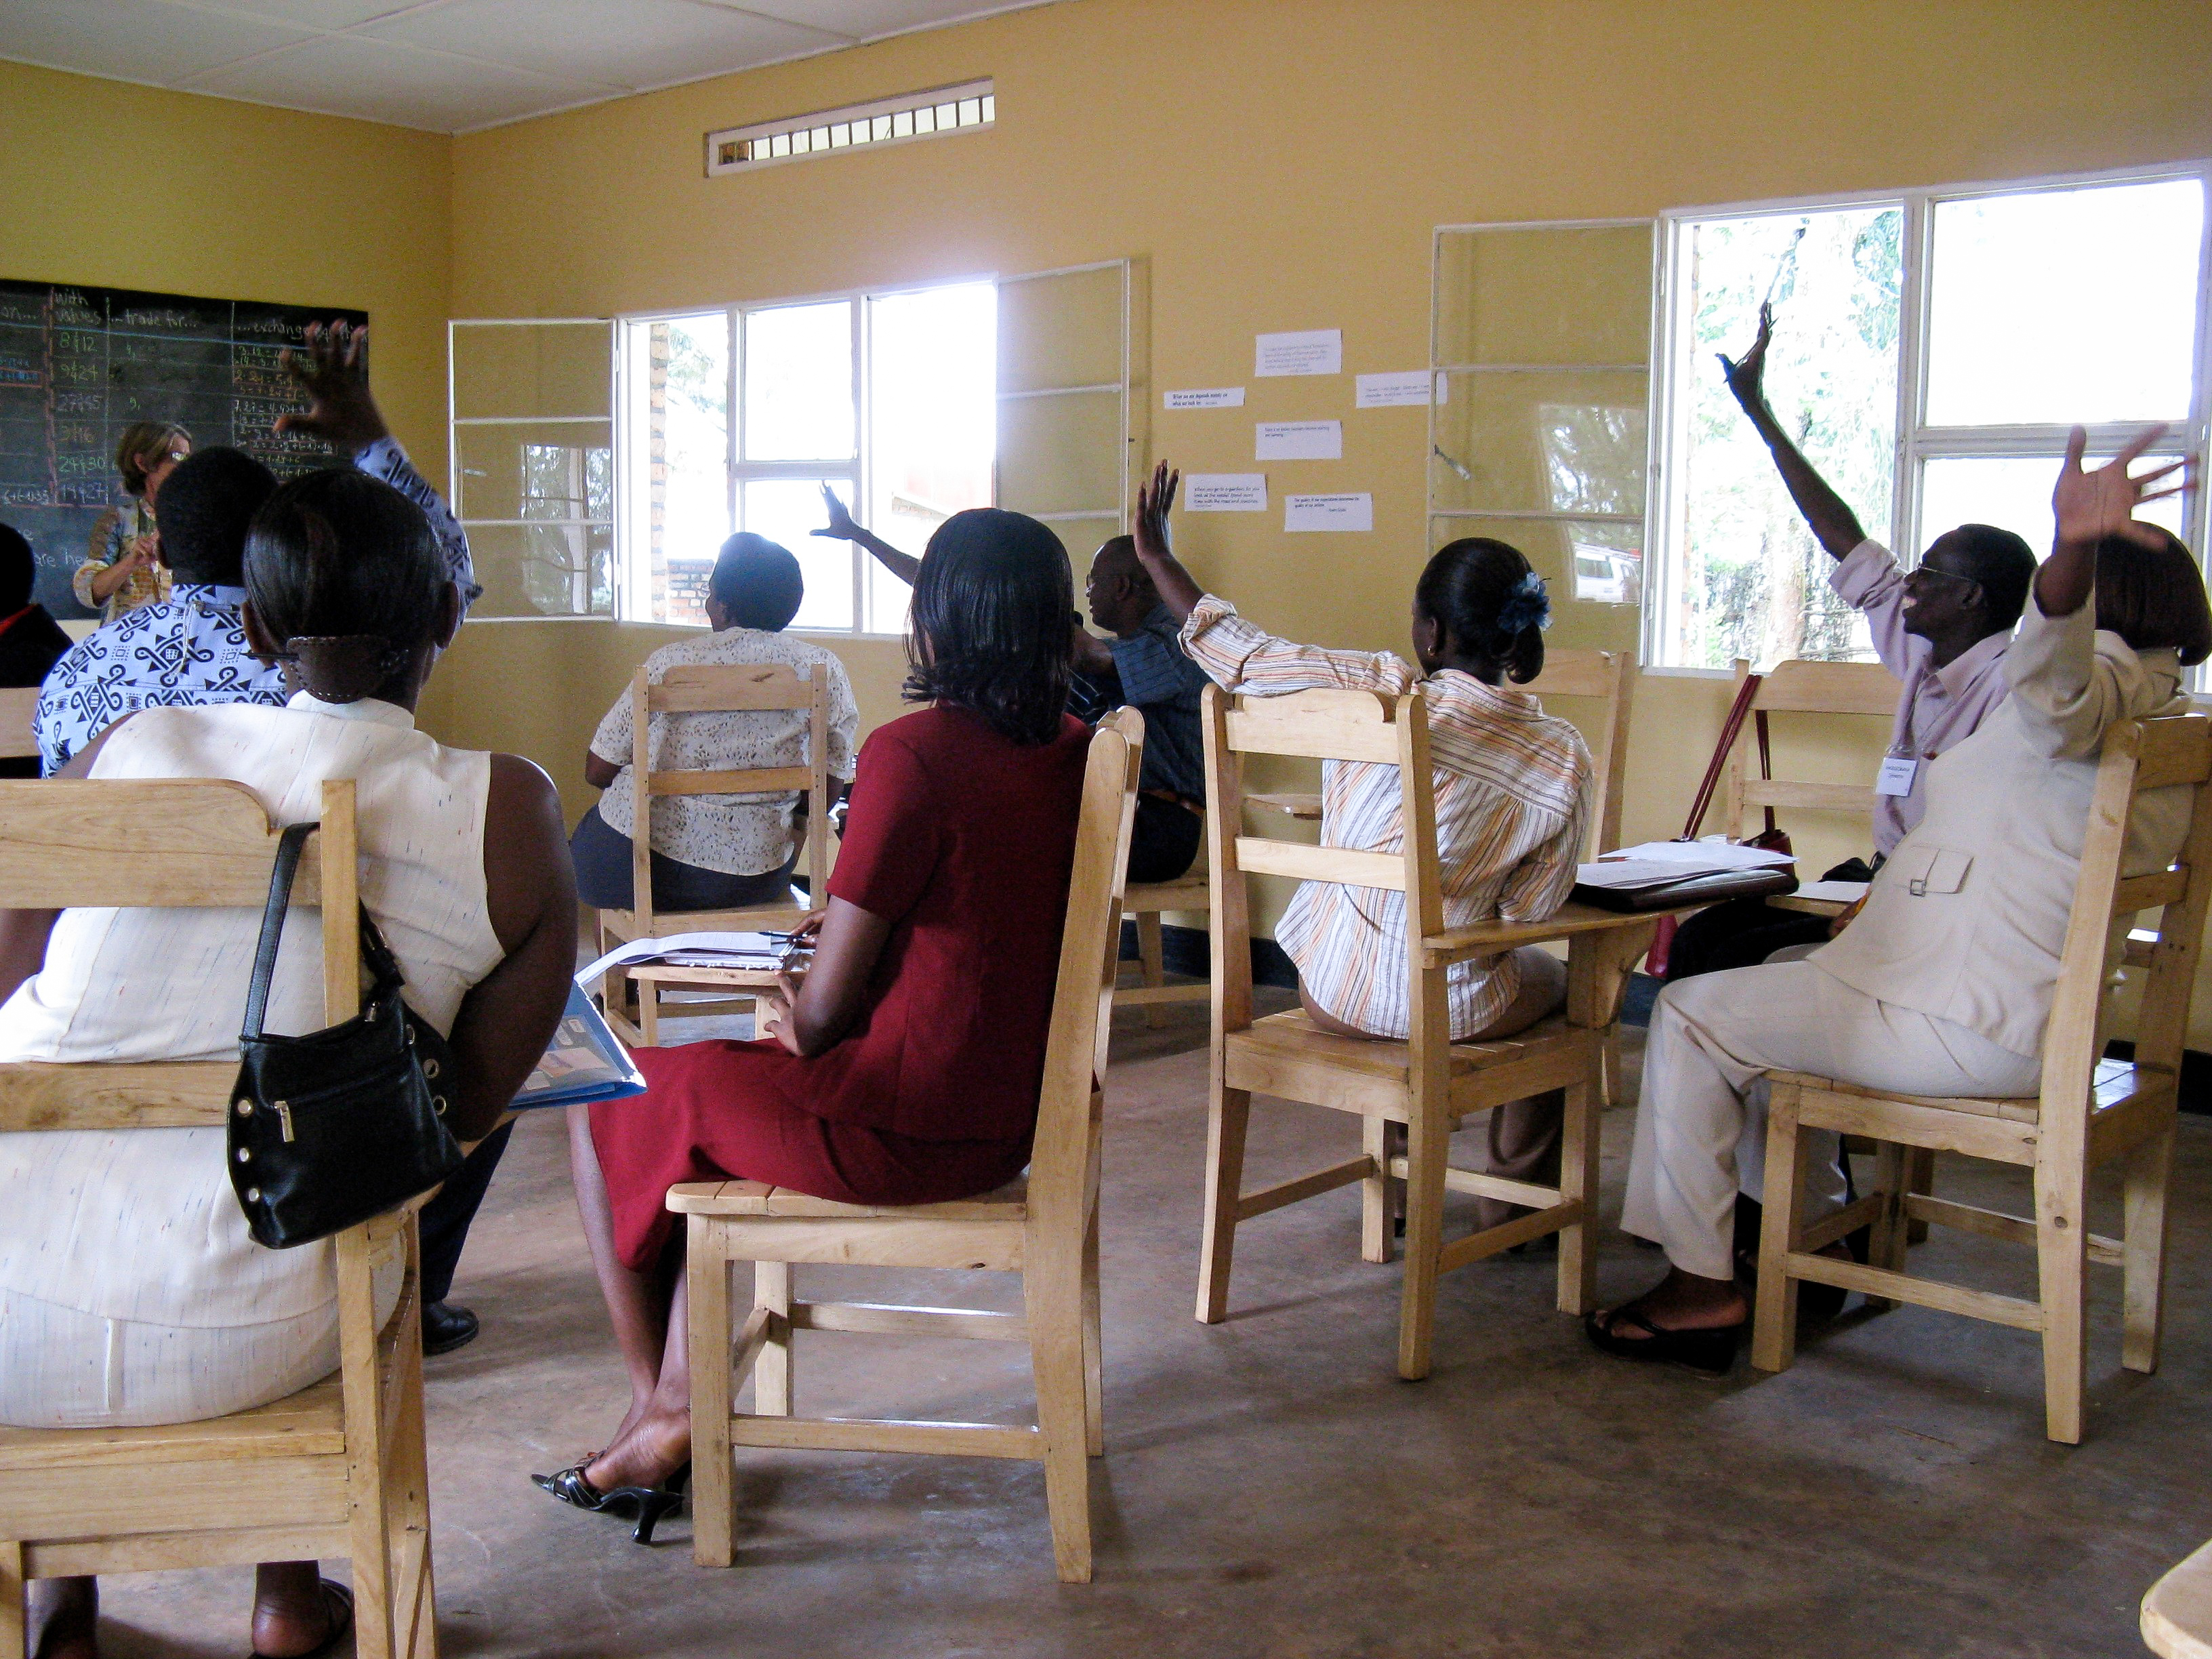 Teaching students in Rwanda particpate in class led by Sacramento State's Elaine Kasimatis